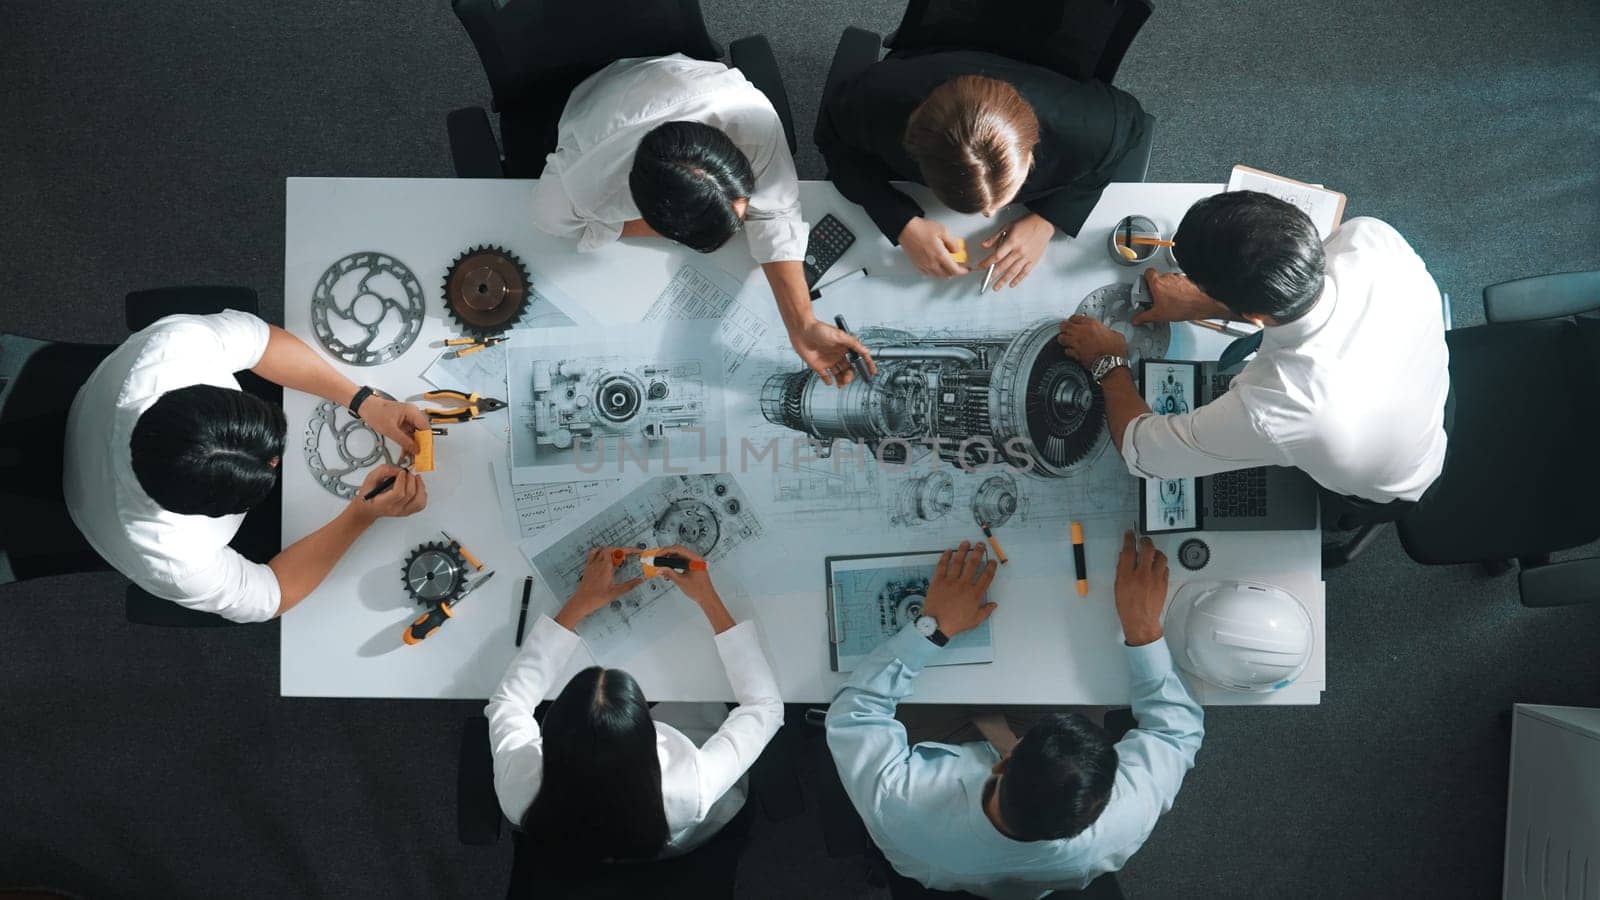 Top down aerial view of smart engineer team working together to design turbine engine. Professional technician discussing about jet engine construction while pointing at part of engine. Alimentation.